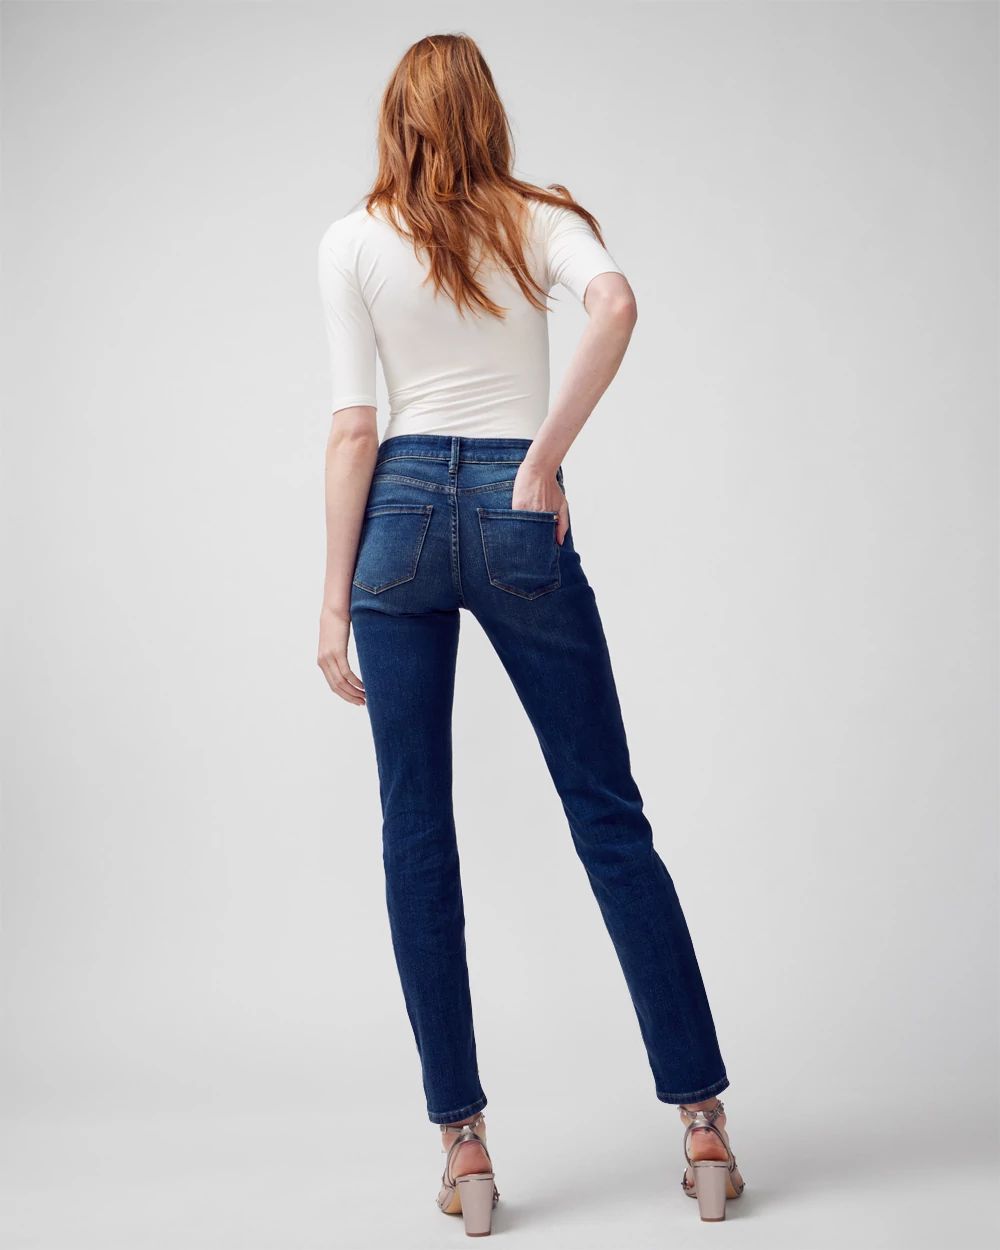 Mid-Rise Everyday Soft Denim  Slim Jeans click to view larger image.